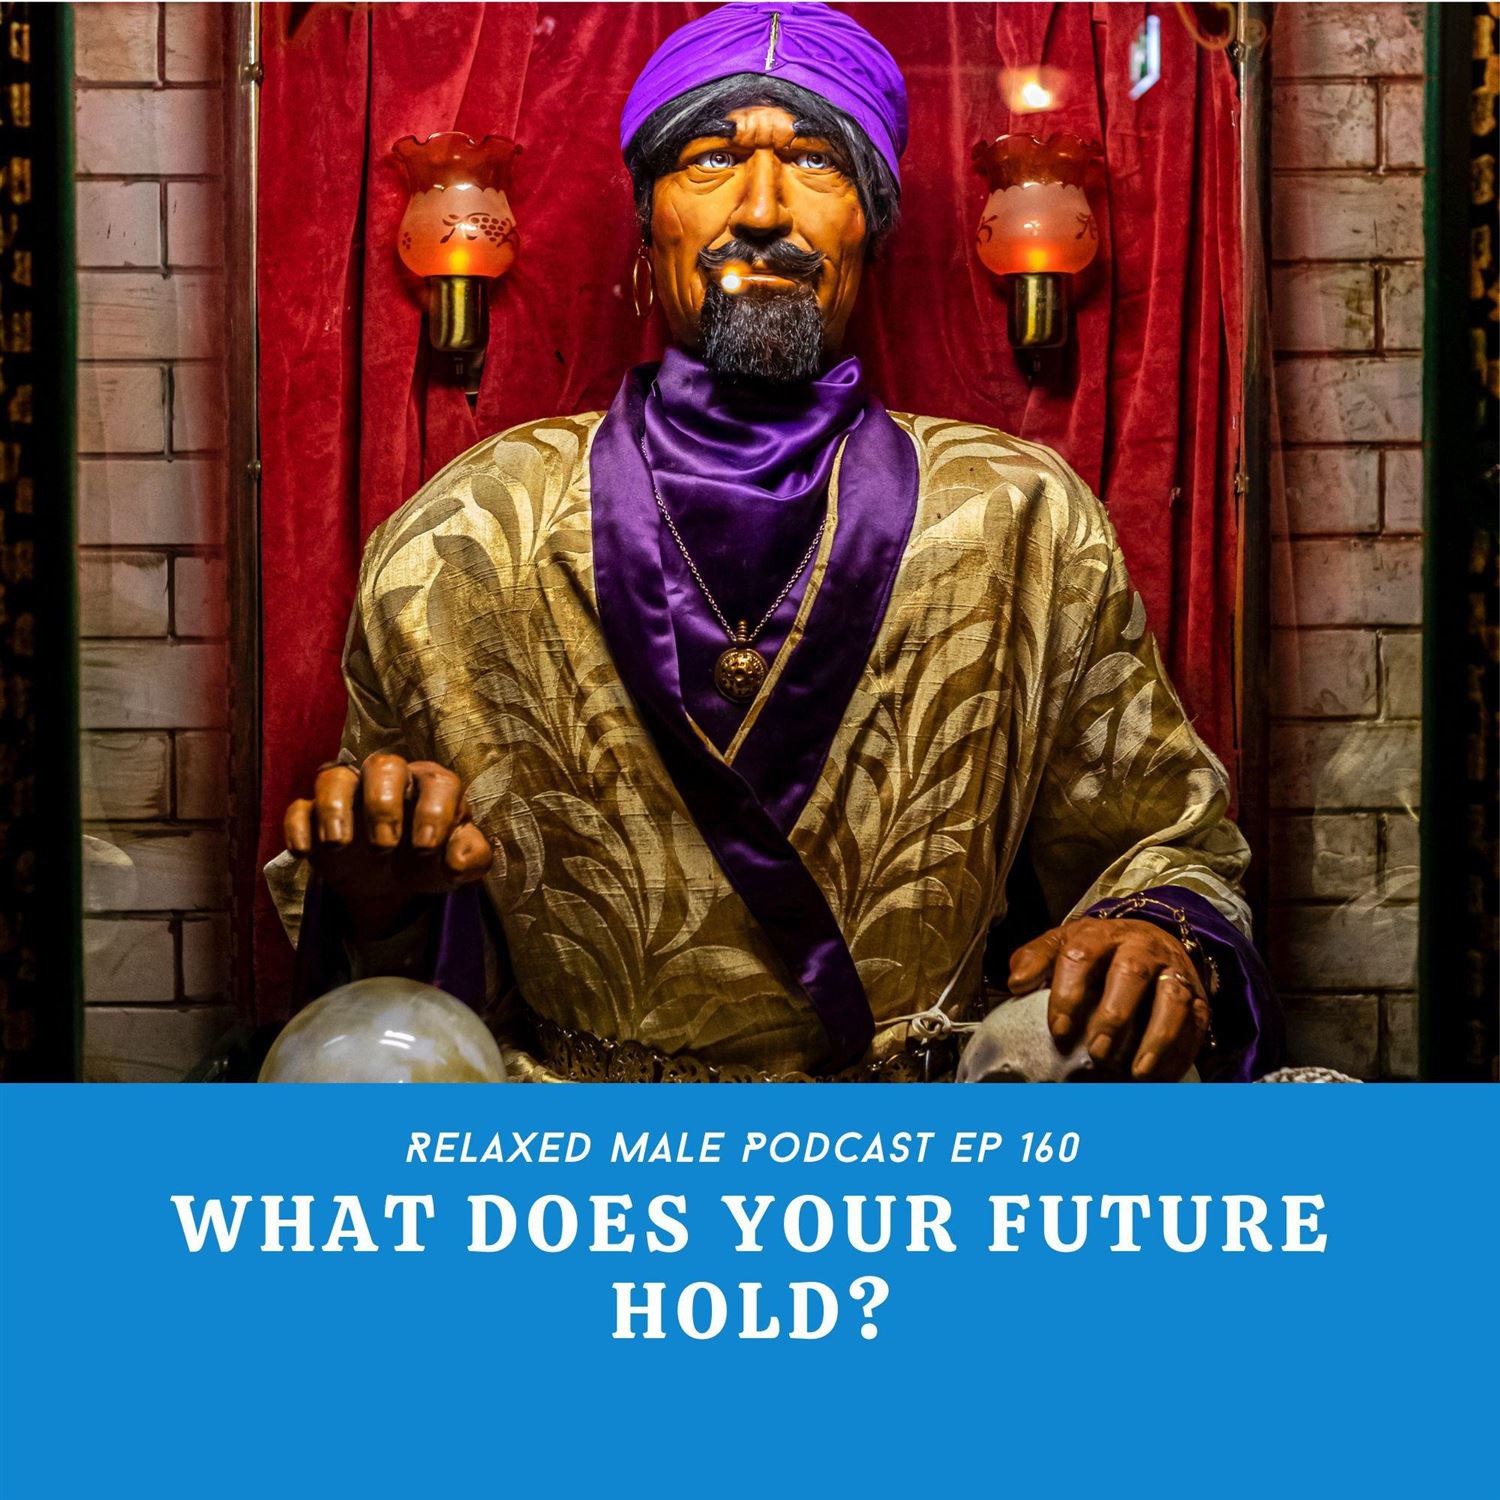 What Does Your Future Hold?